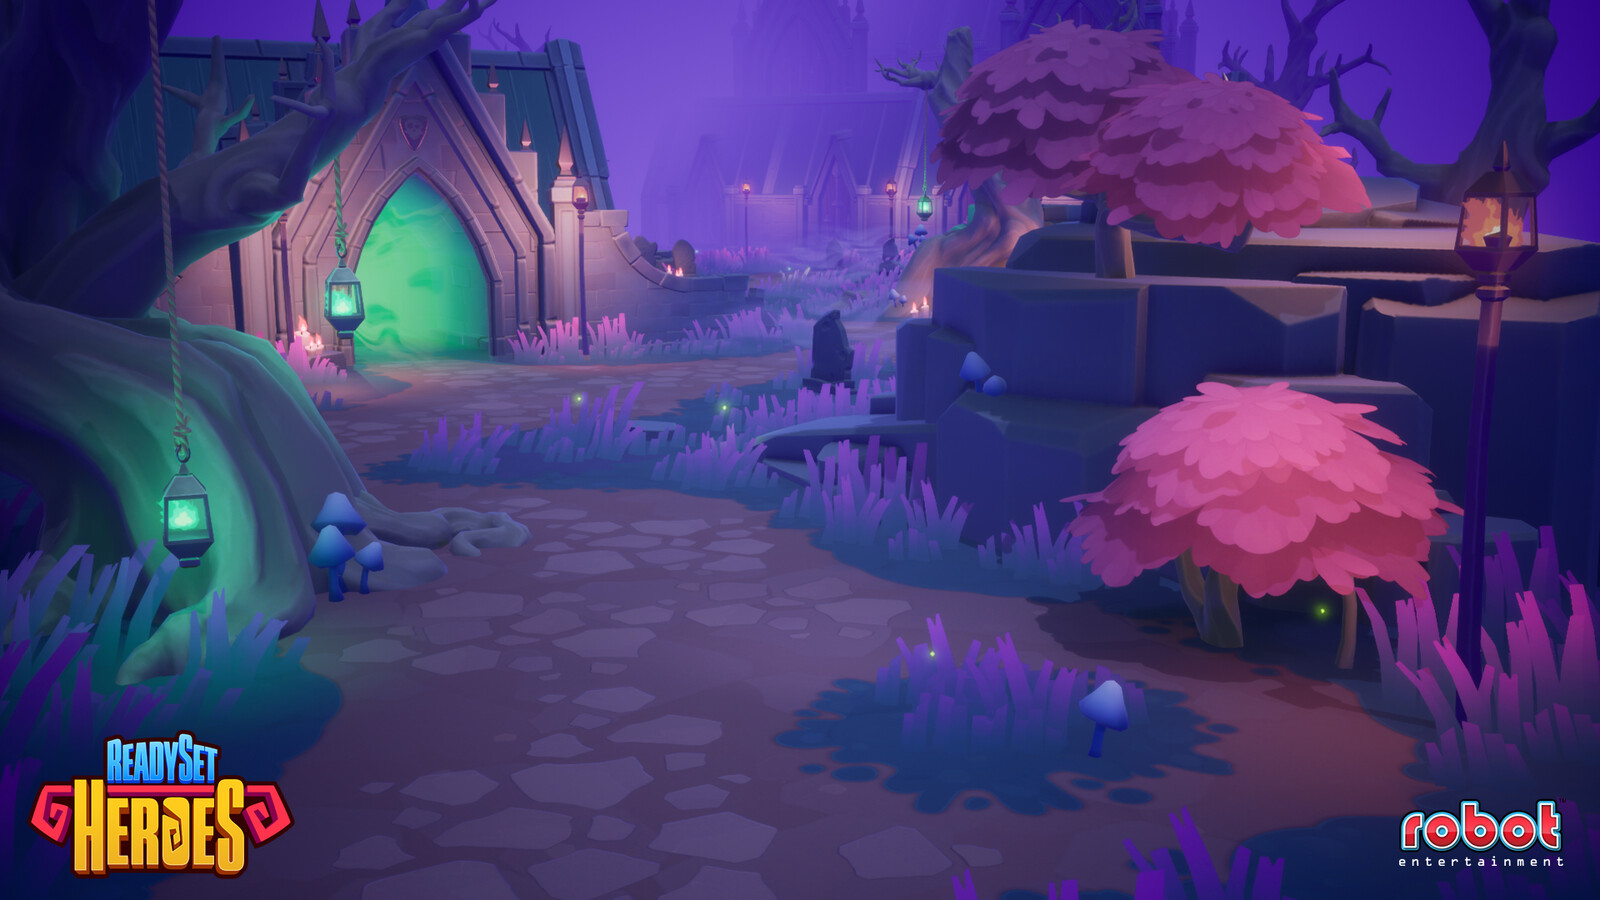 Graveyard art set - Created terrain materials, decals, foliage assets, and built out levels.